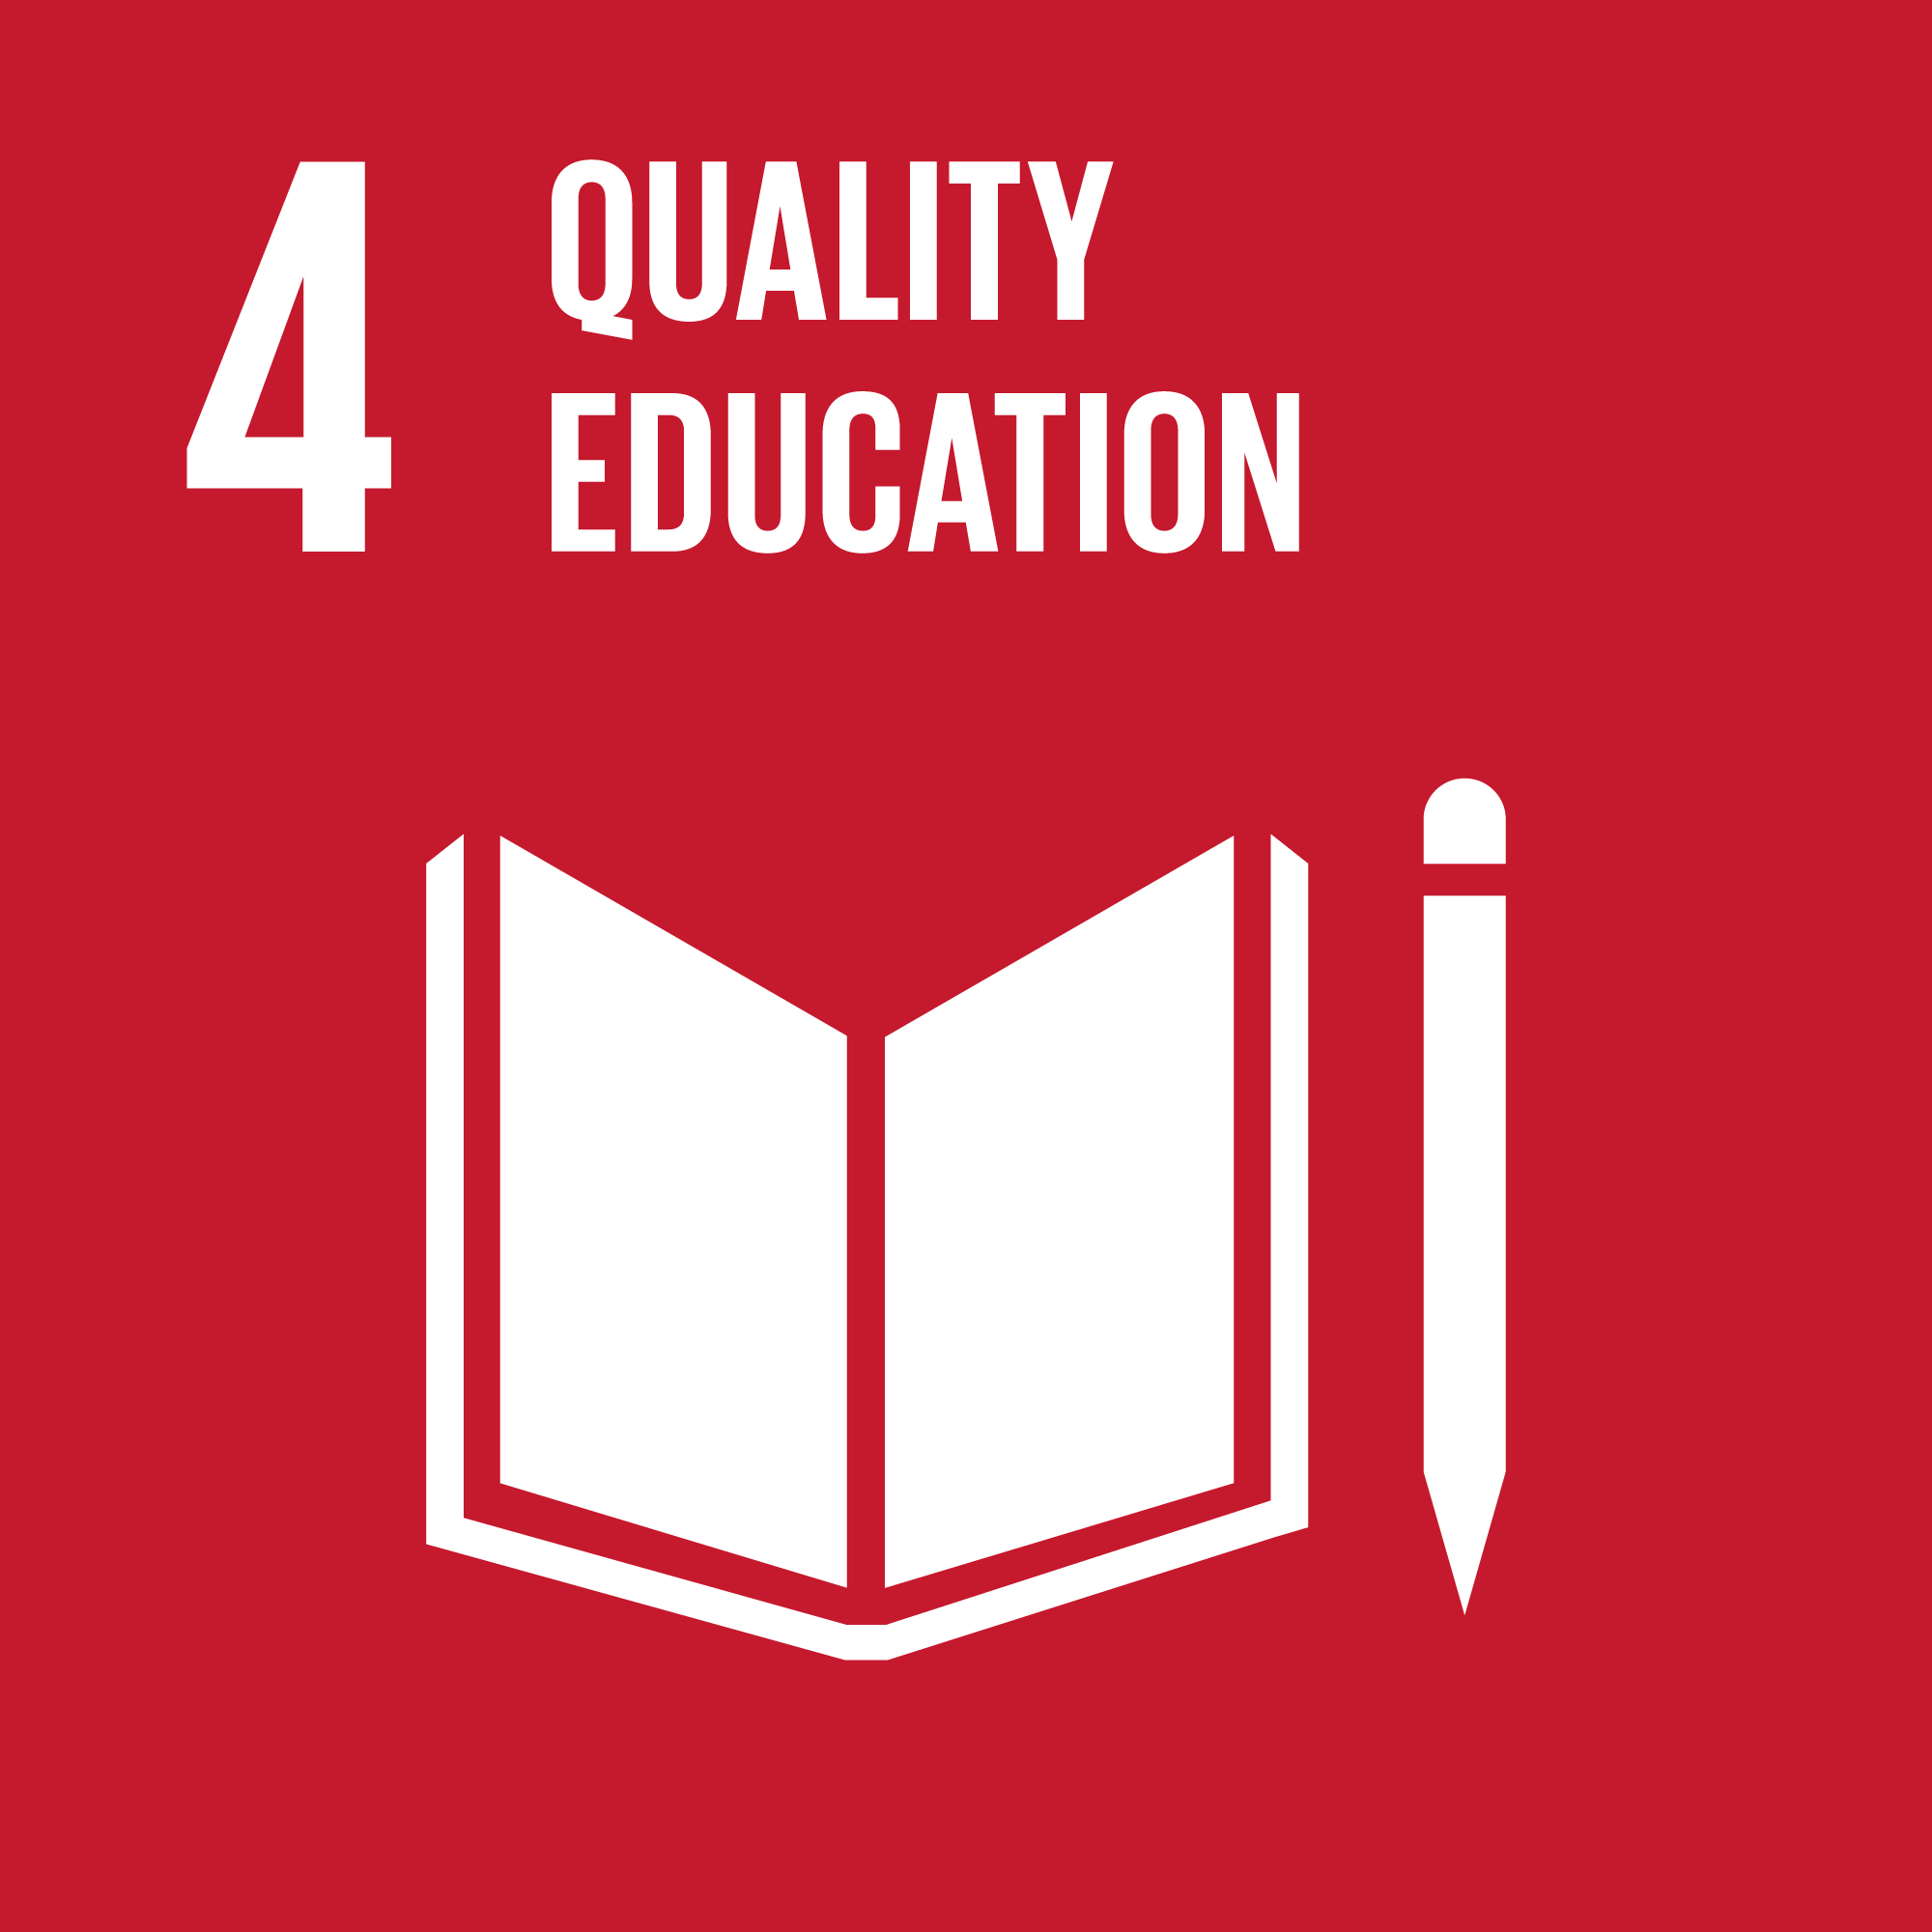 Goal 4: Quality Education - Ensure inclusive and equitable quality education and promote lifelong learning opportunities for all